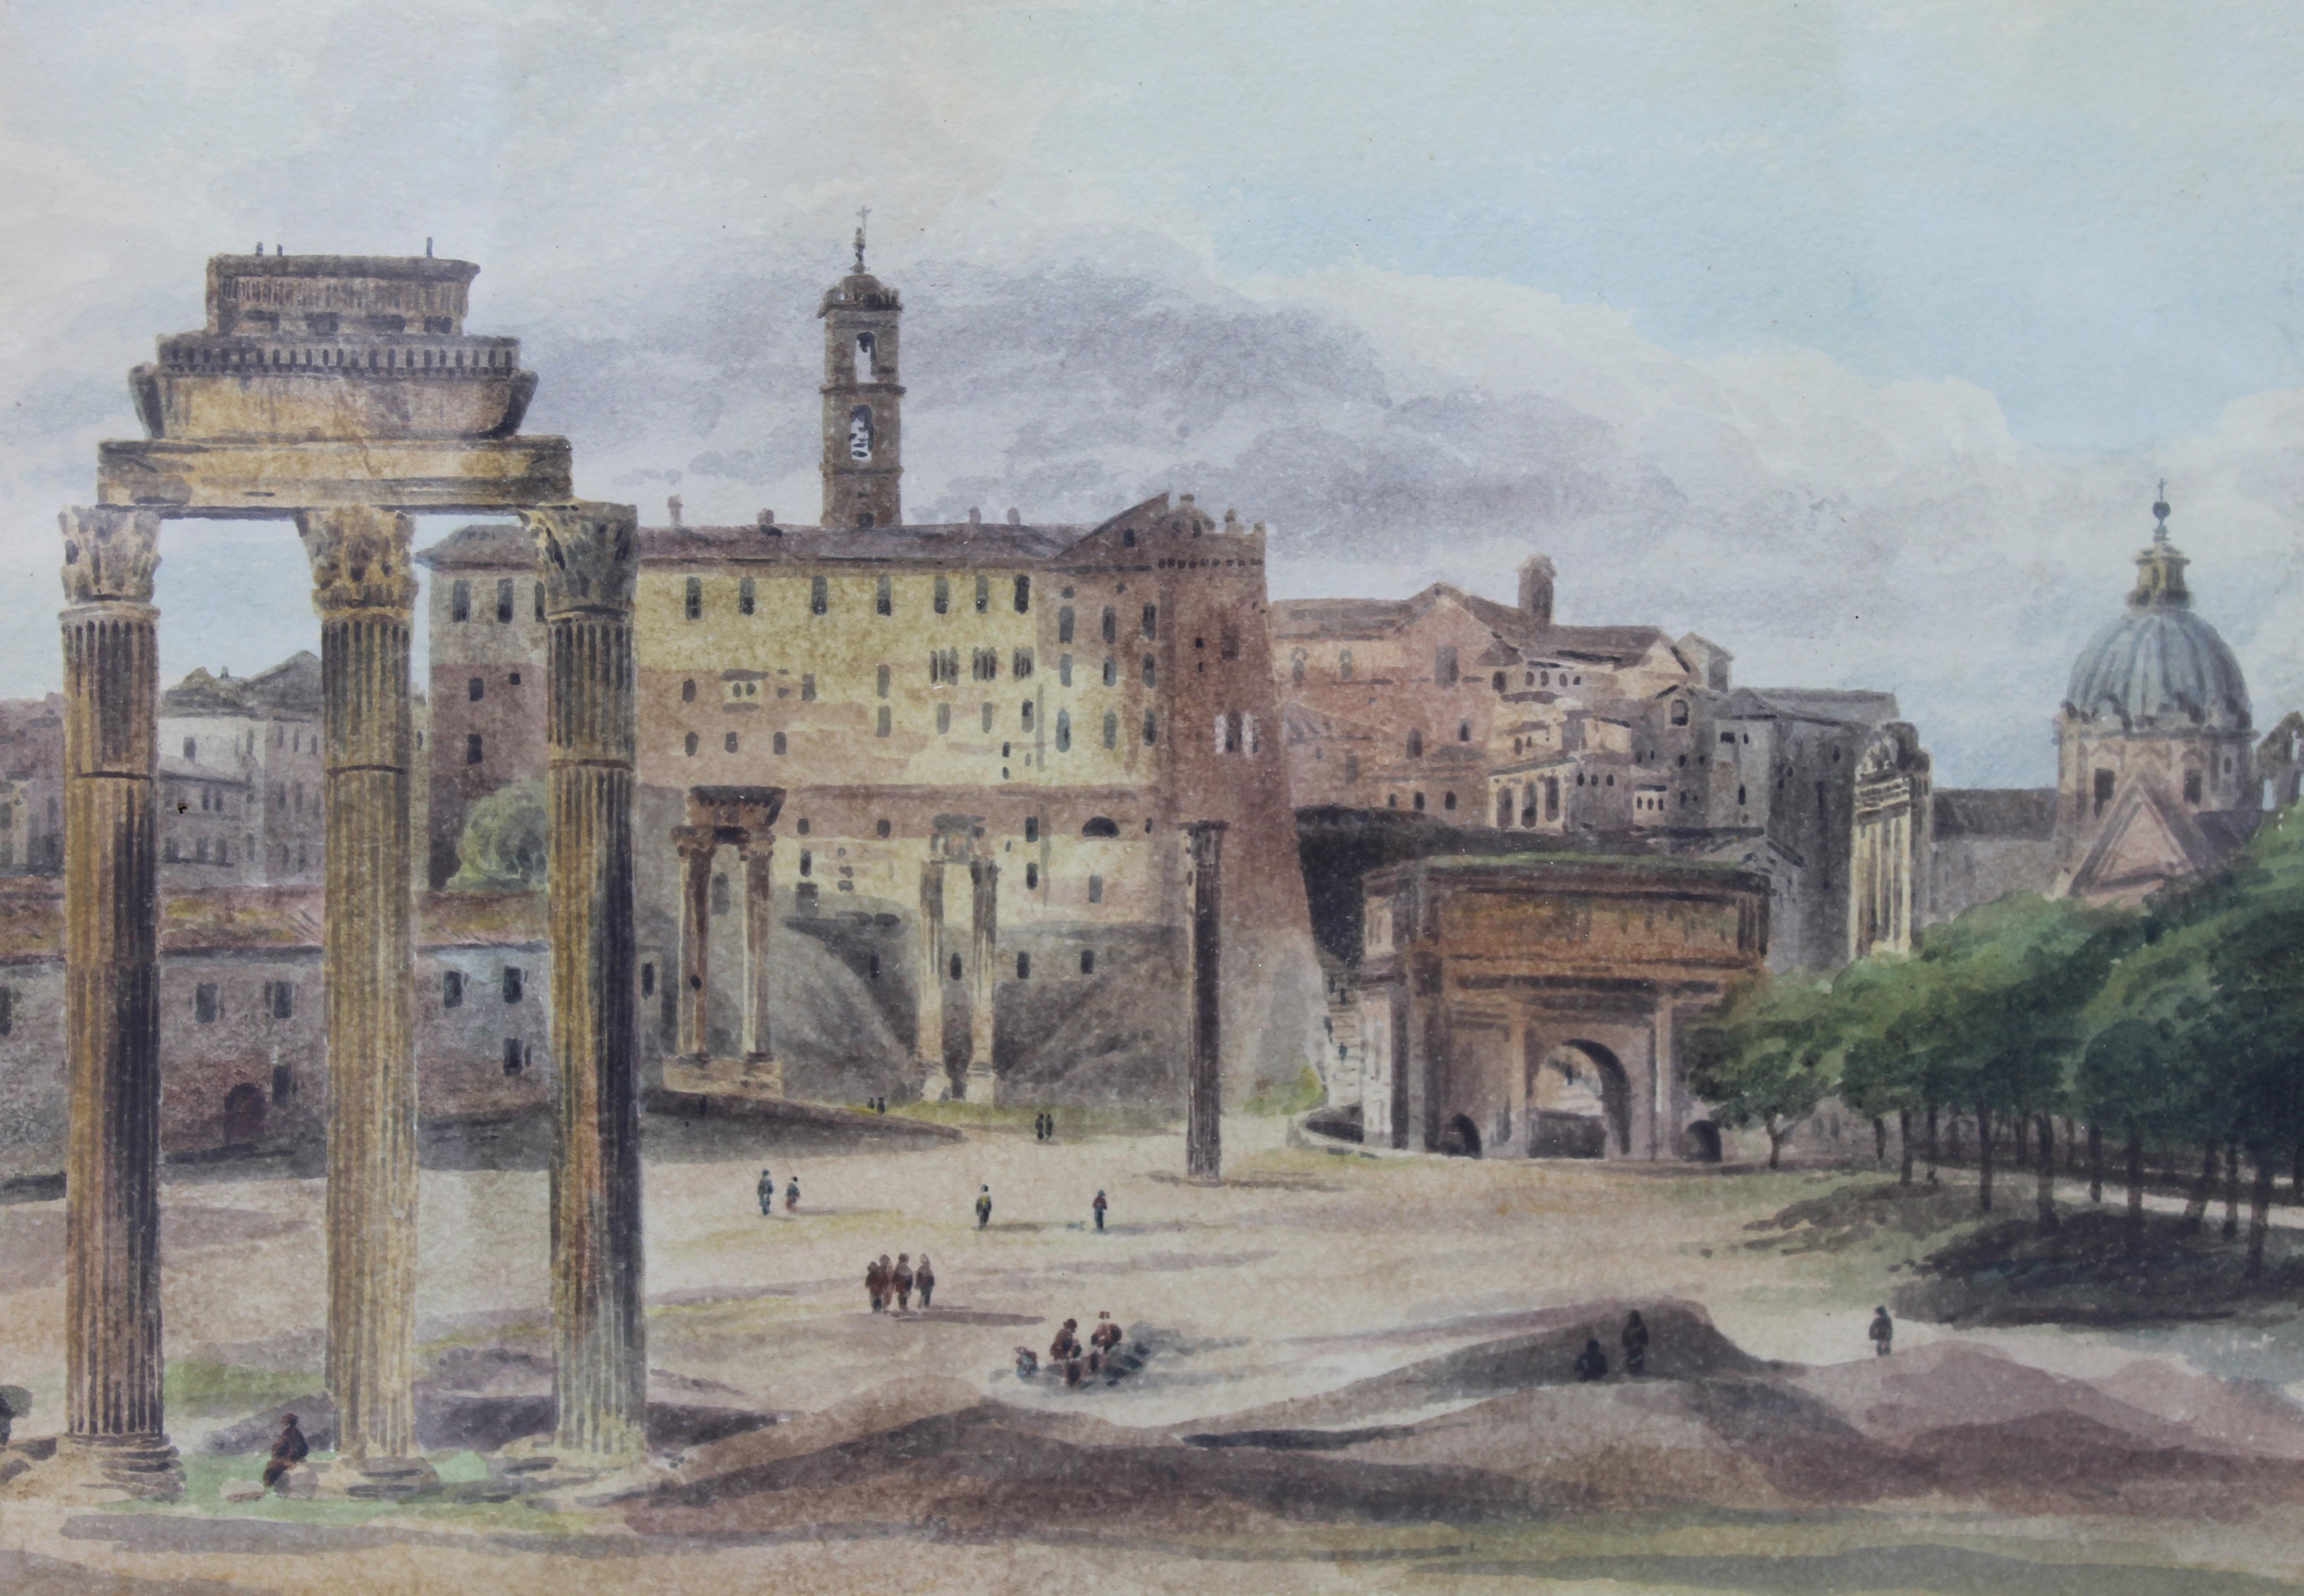 This view of the Roman Forum show a daily scenes of Roman life before the complete Campaign excavation; painted by John Thomas Ibbetson, later Sir John Thomas Selwyn, 6th Bart (sometimes Selwin), Ibbetson was born in 1789, younger son of Sir James